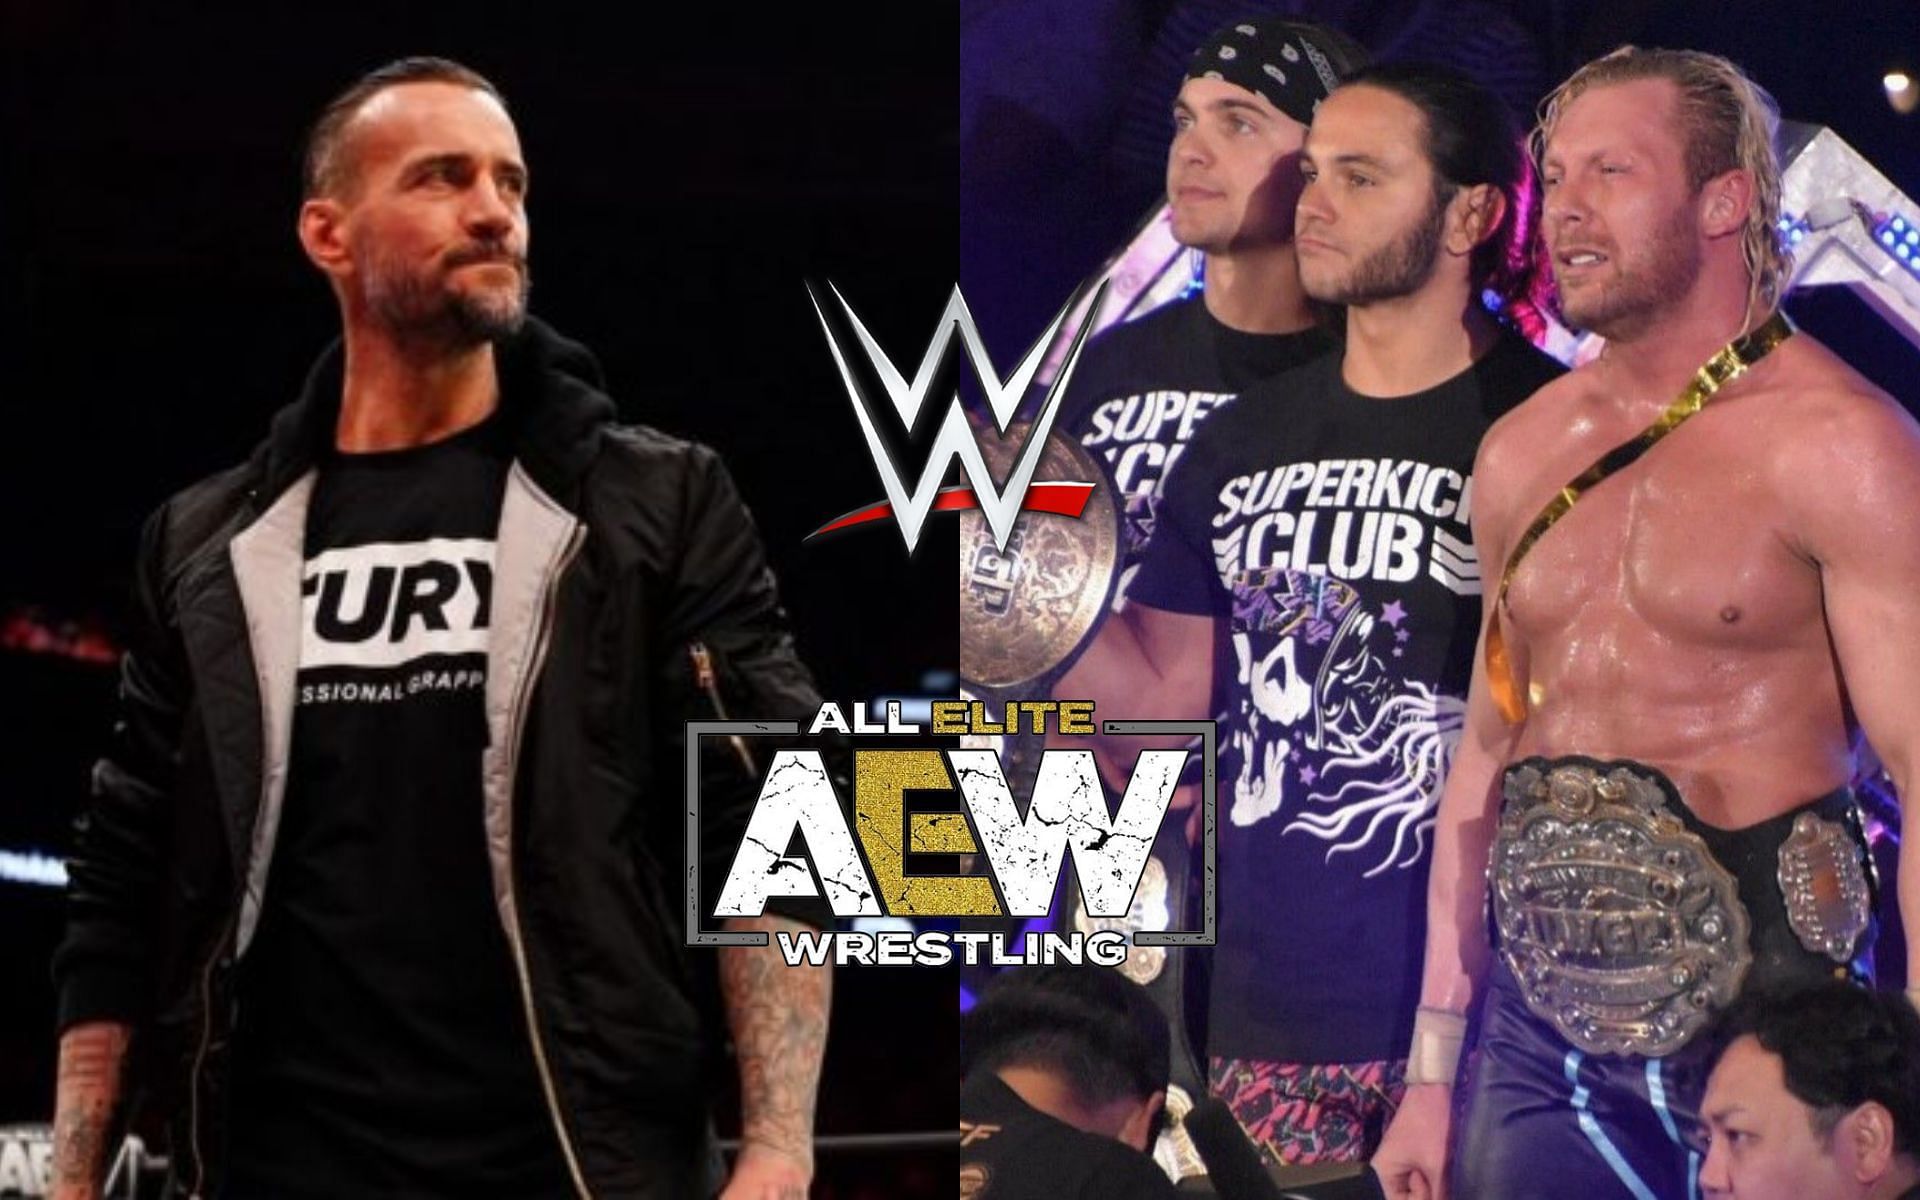 CM Punk (left) and The Elite [The Young Bucks and Kenny Omega] (right).